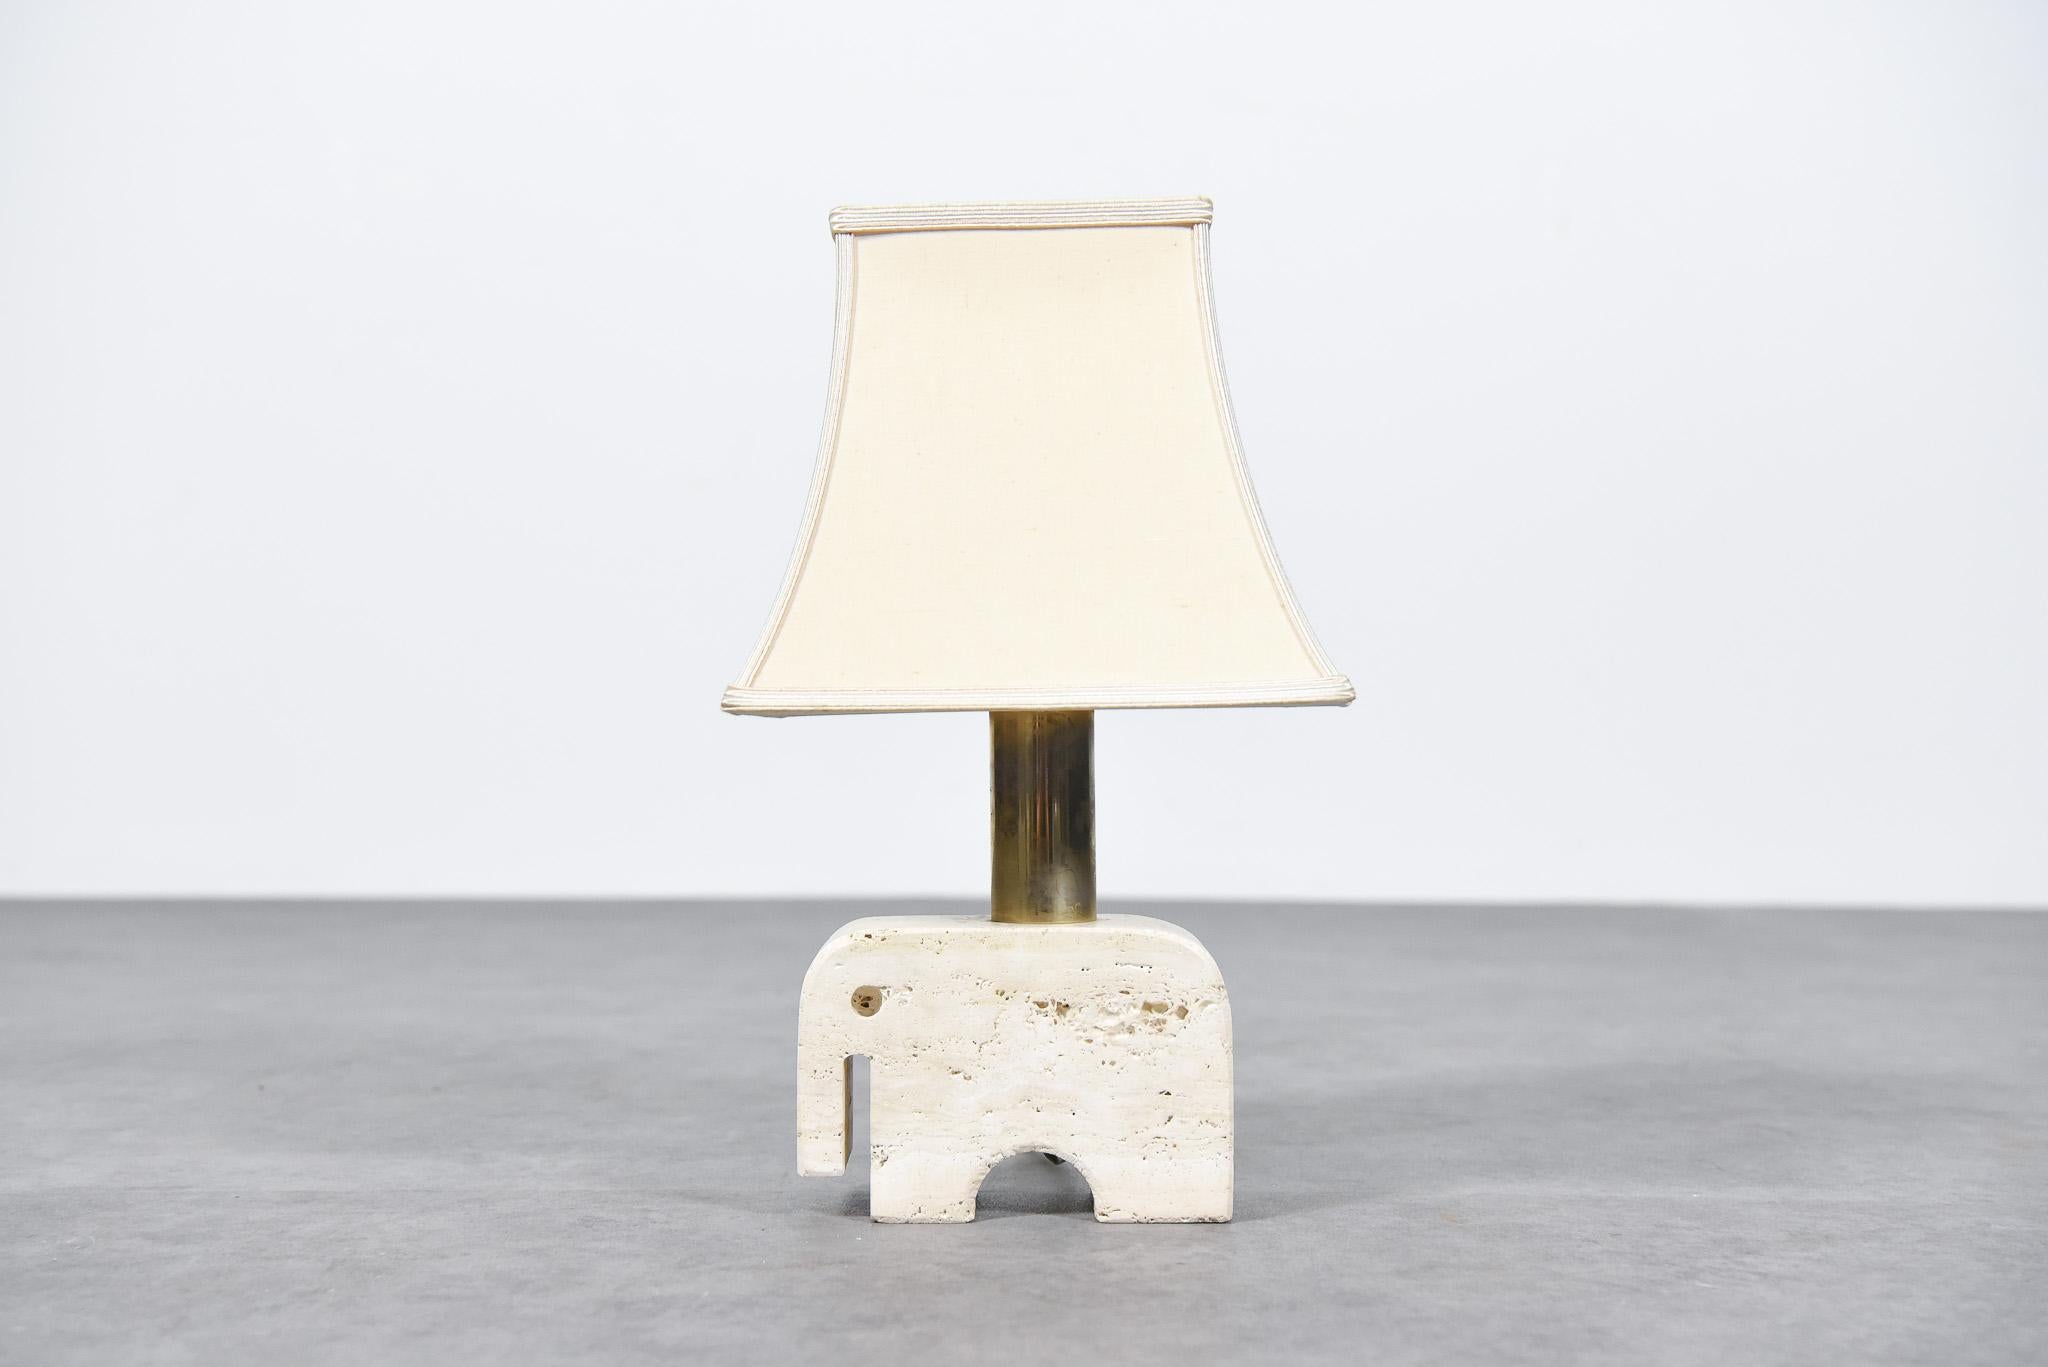 Very rare sculptural travertine table lamp made by the Italian manufacturer Fratelli Manelli in the 1970s. The lamp is in original condition including the lampshade.
